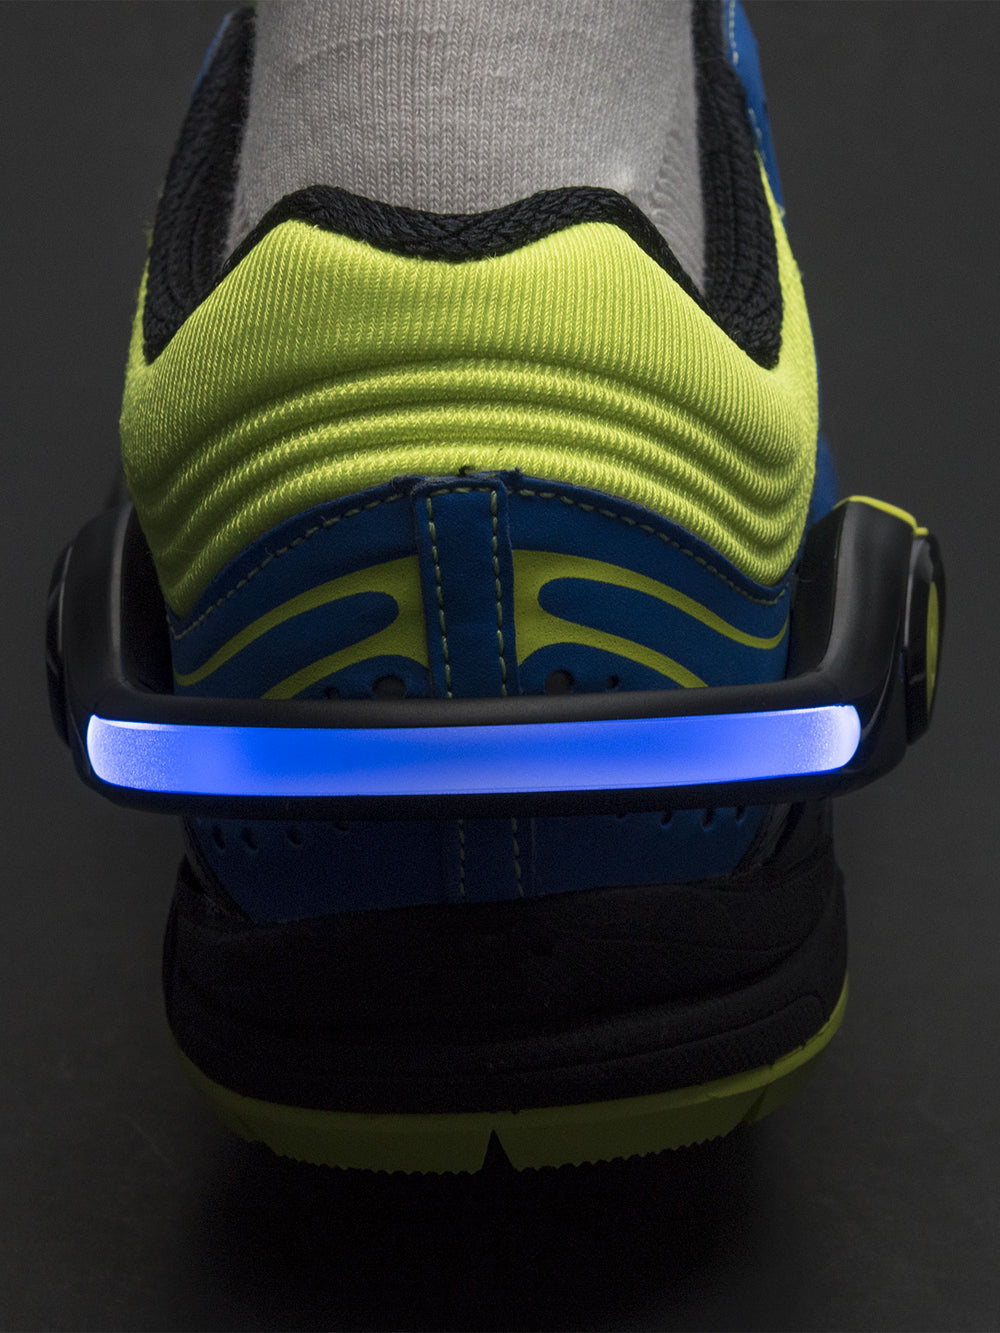 1 pcs USB LED Clip On Lights - Perfect for Night Runners | Led shoes, Night  jogging, Runners shoes